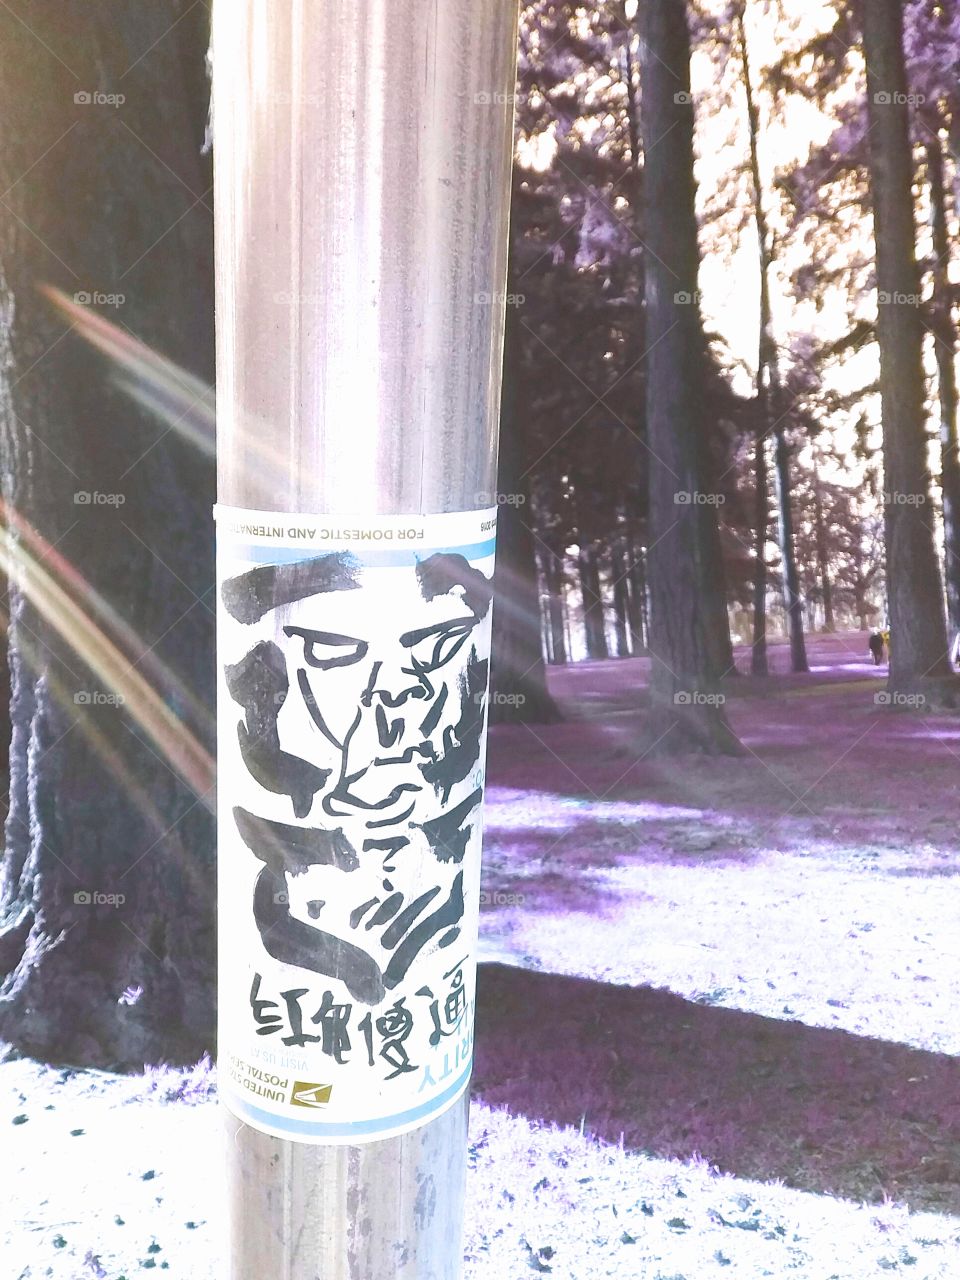 Sticker on a pole in the park